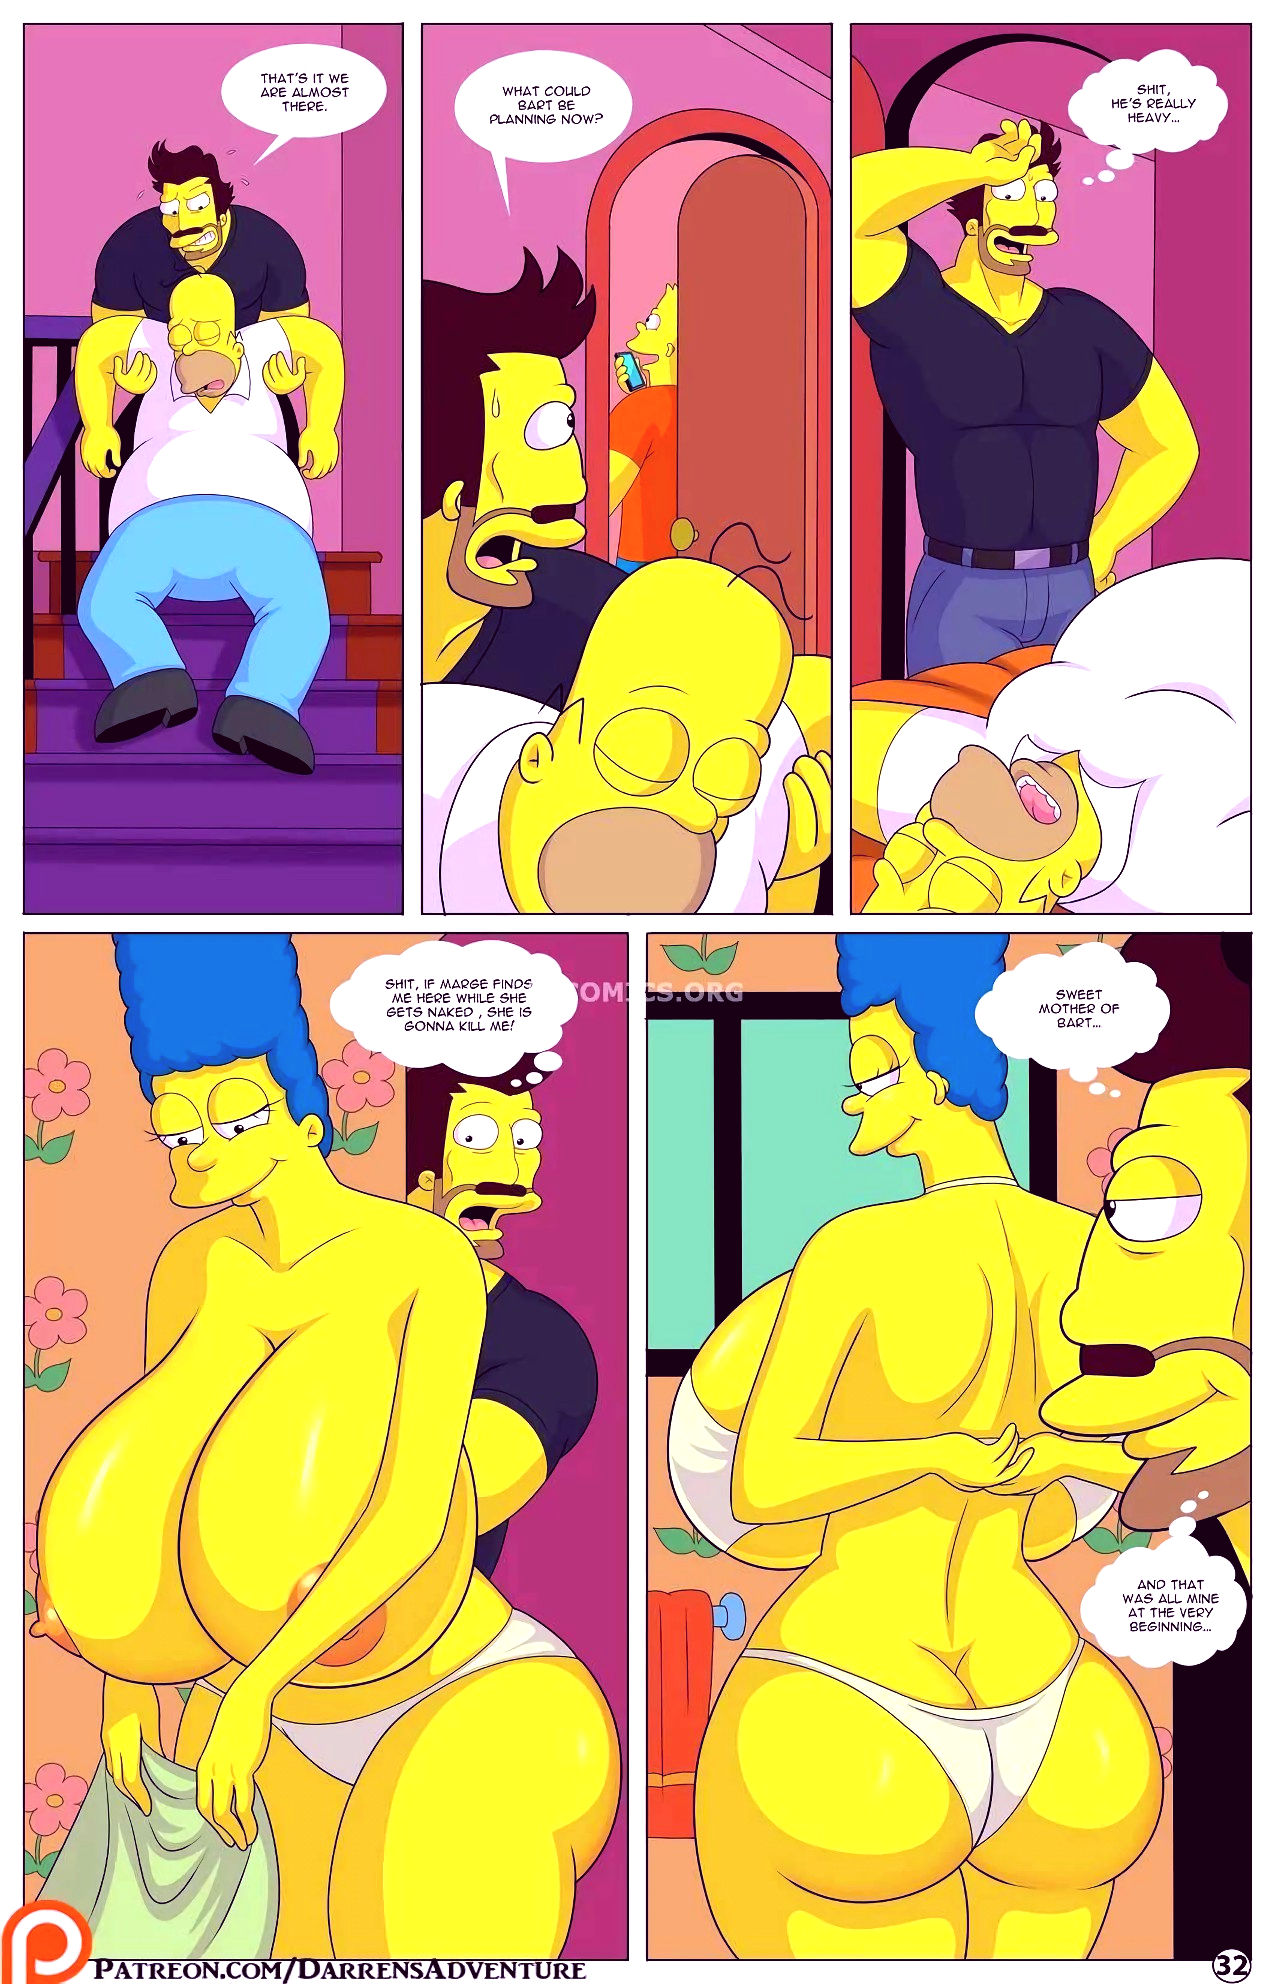 Darrens adventure or welcome to springfield porn comic picture 110